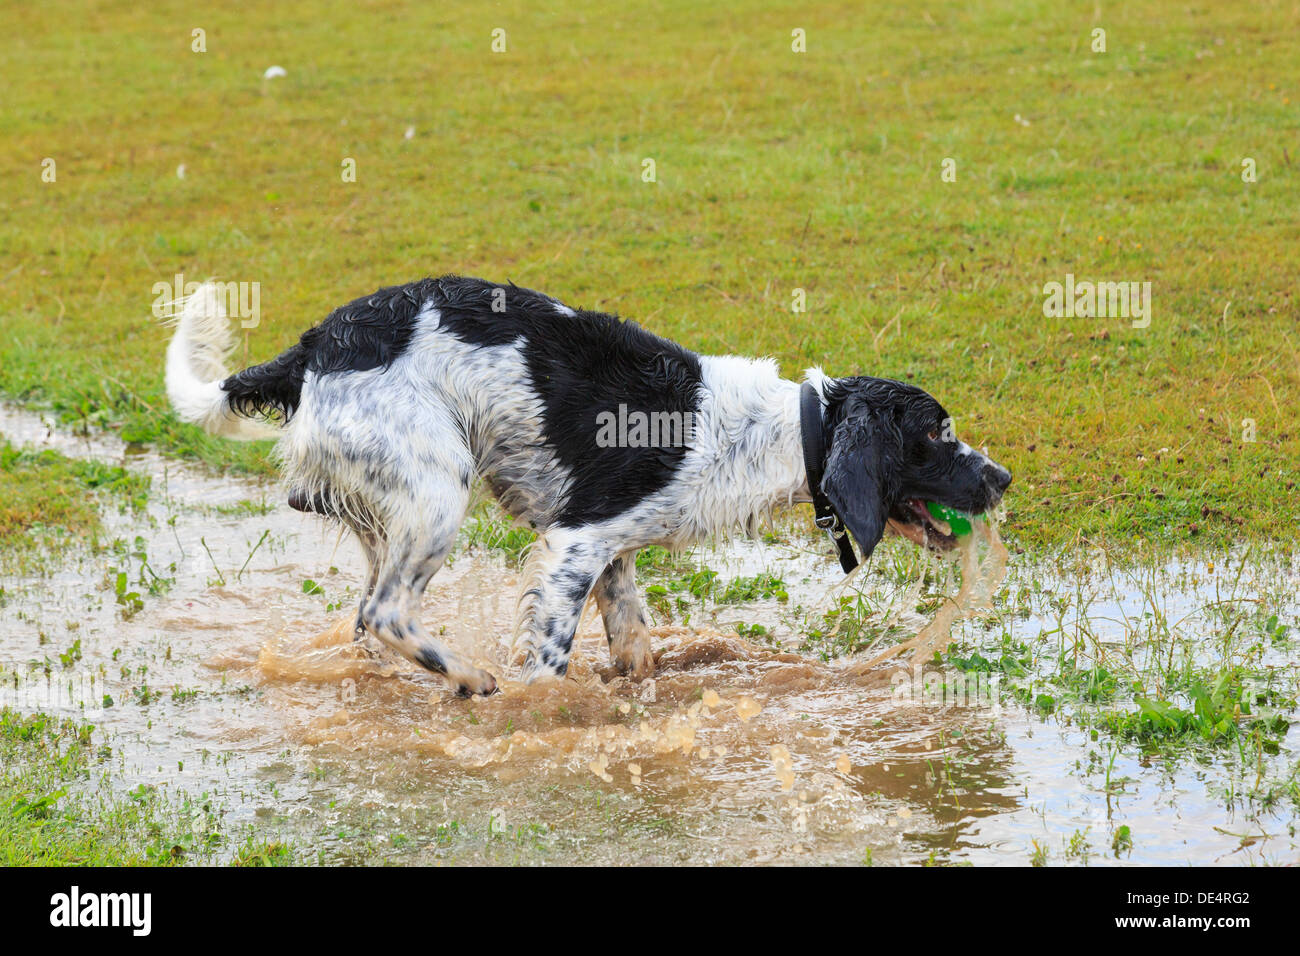 Soaking wet black and White English Springer Spaniel dog running in a puddle of water to retrieve a ball. England, UK, Britain Stock Photo